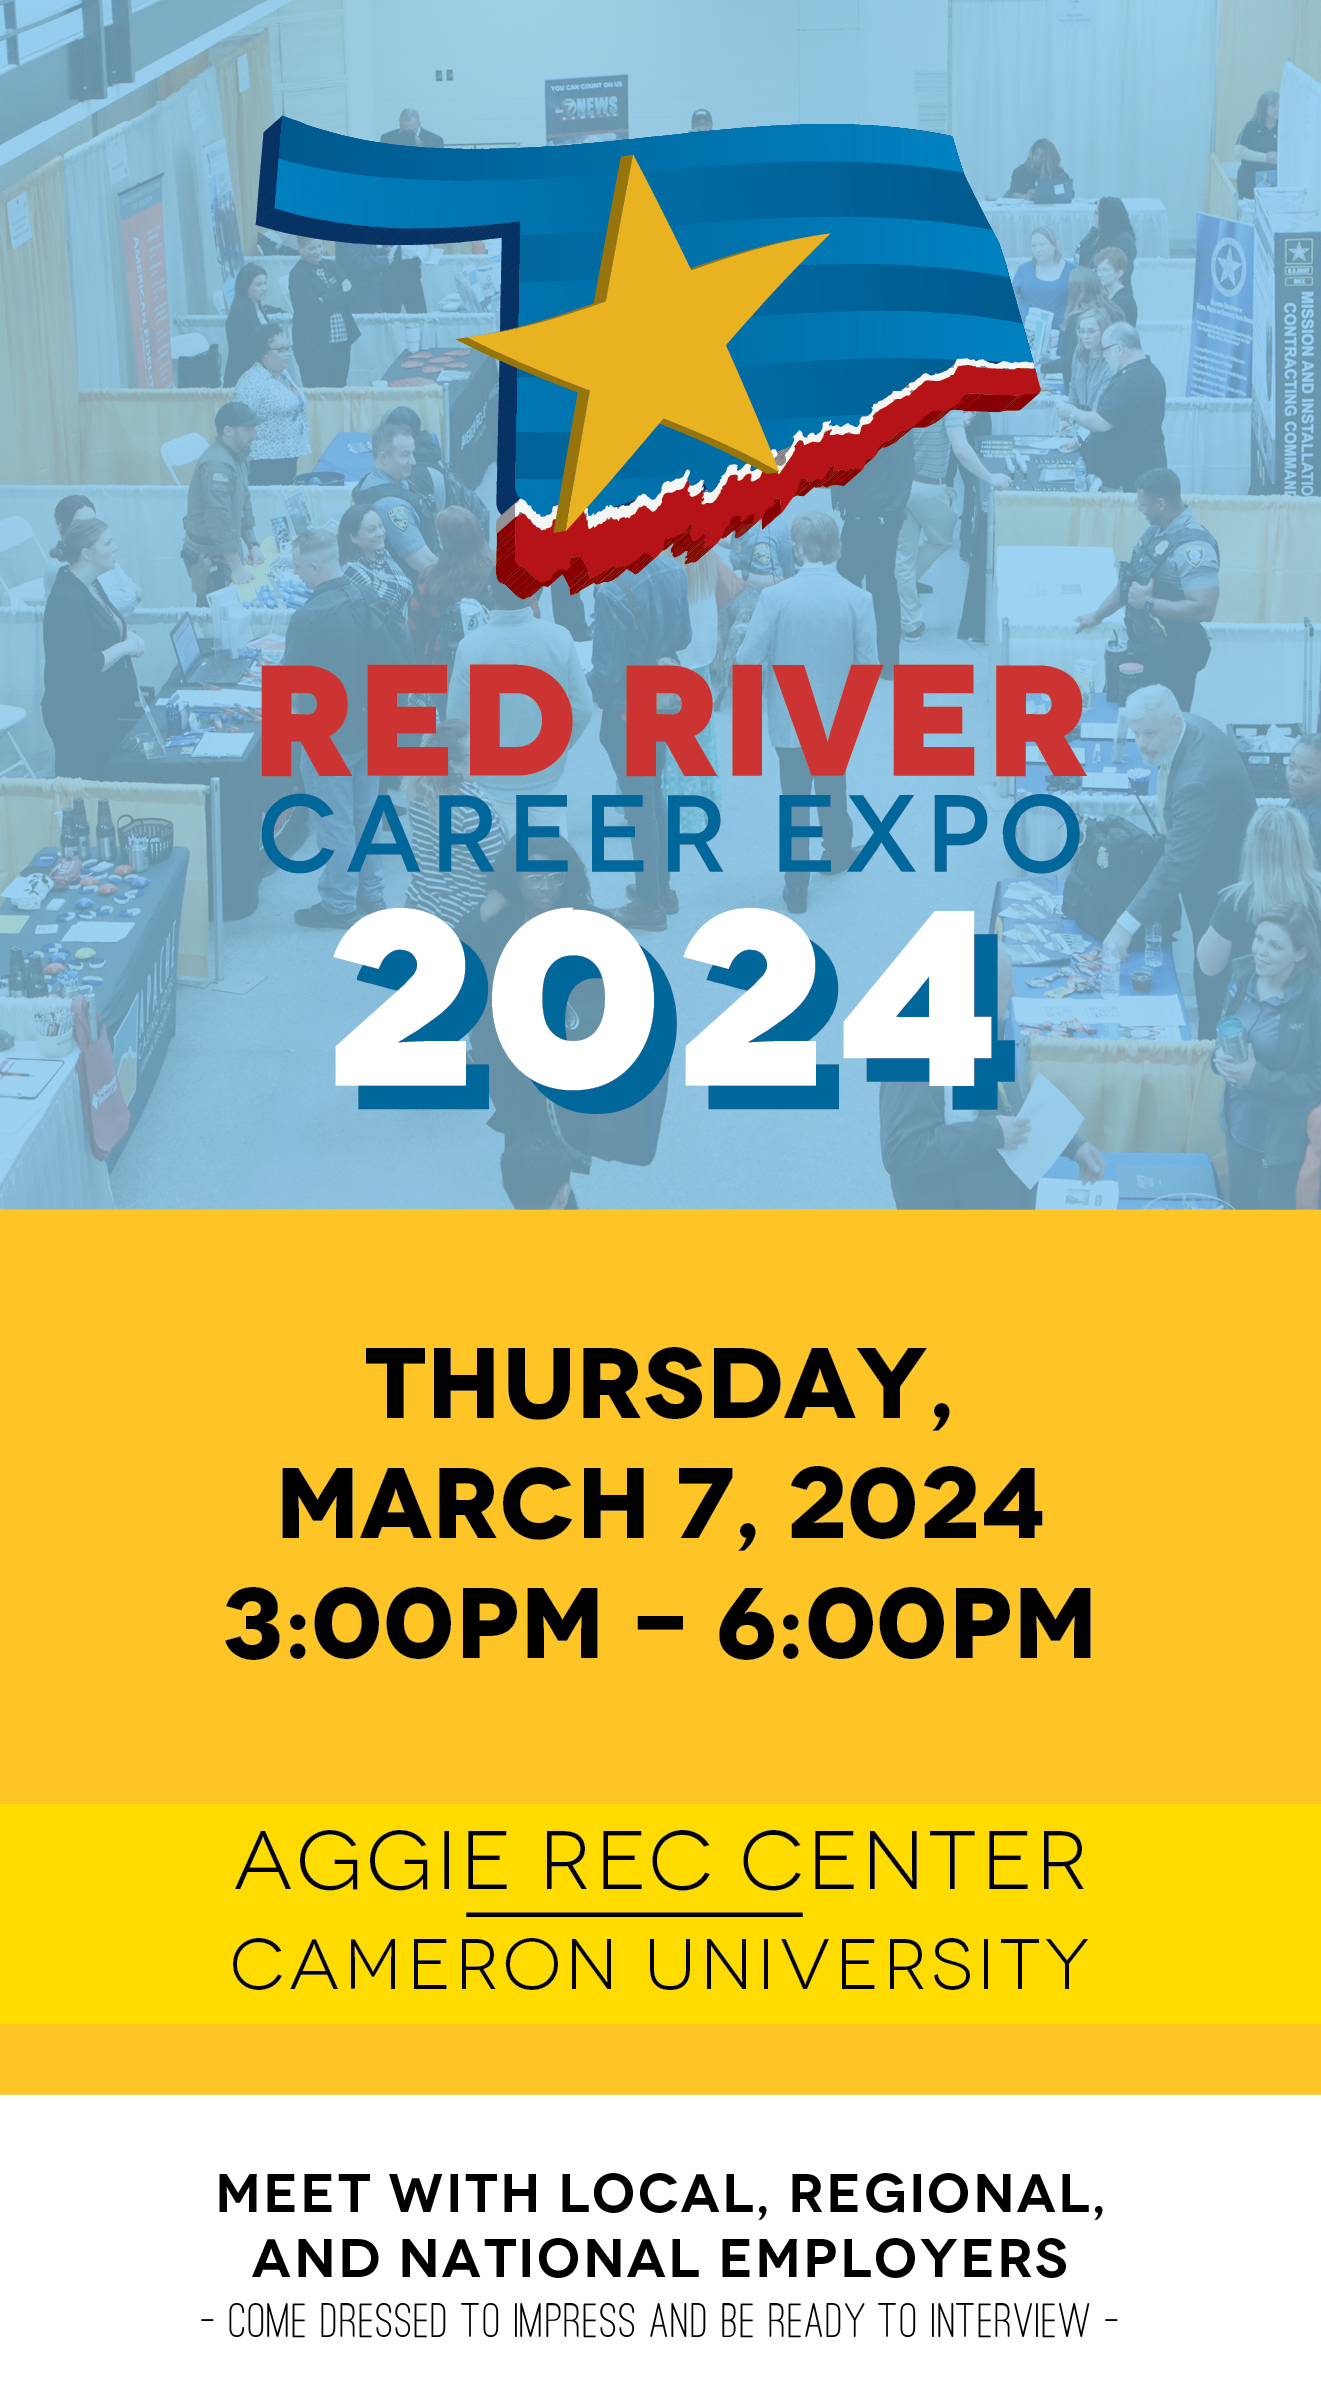 Red River Career Expo
Thursday, March 7
3 to 6 p.m.
Aggie Rec Center
Cameron University

Meet with local, regional and national employers
Come dressed to impress and be ready to interview